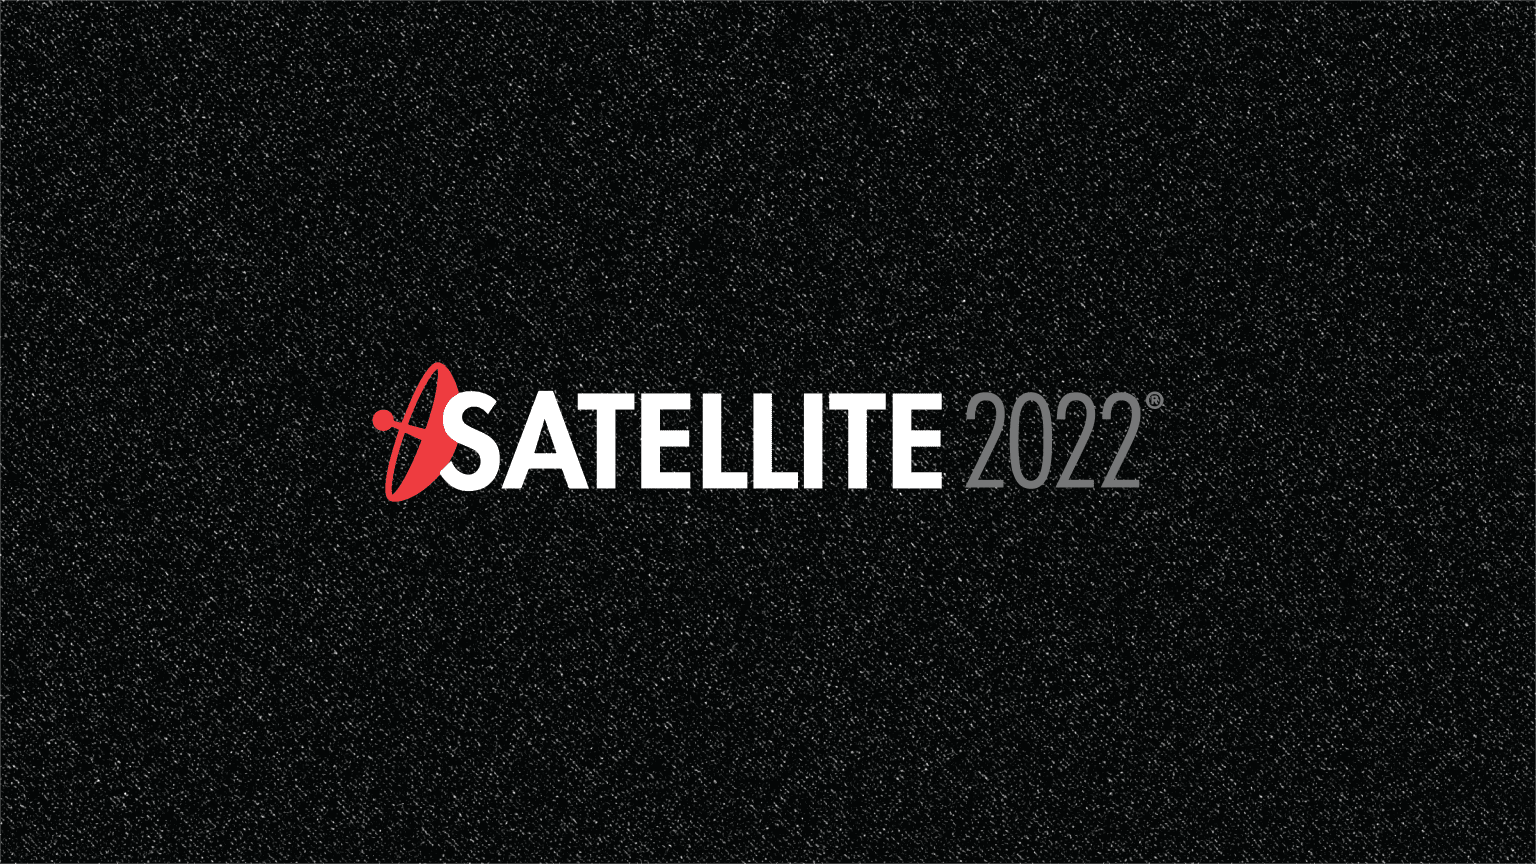 RBSâ€™s Satellite 2022 Conference quick take on cybersecurity: Increasing urgency, few immediate solutions